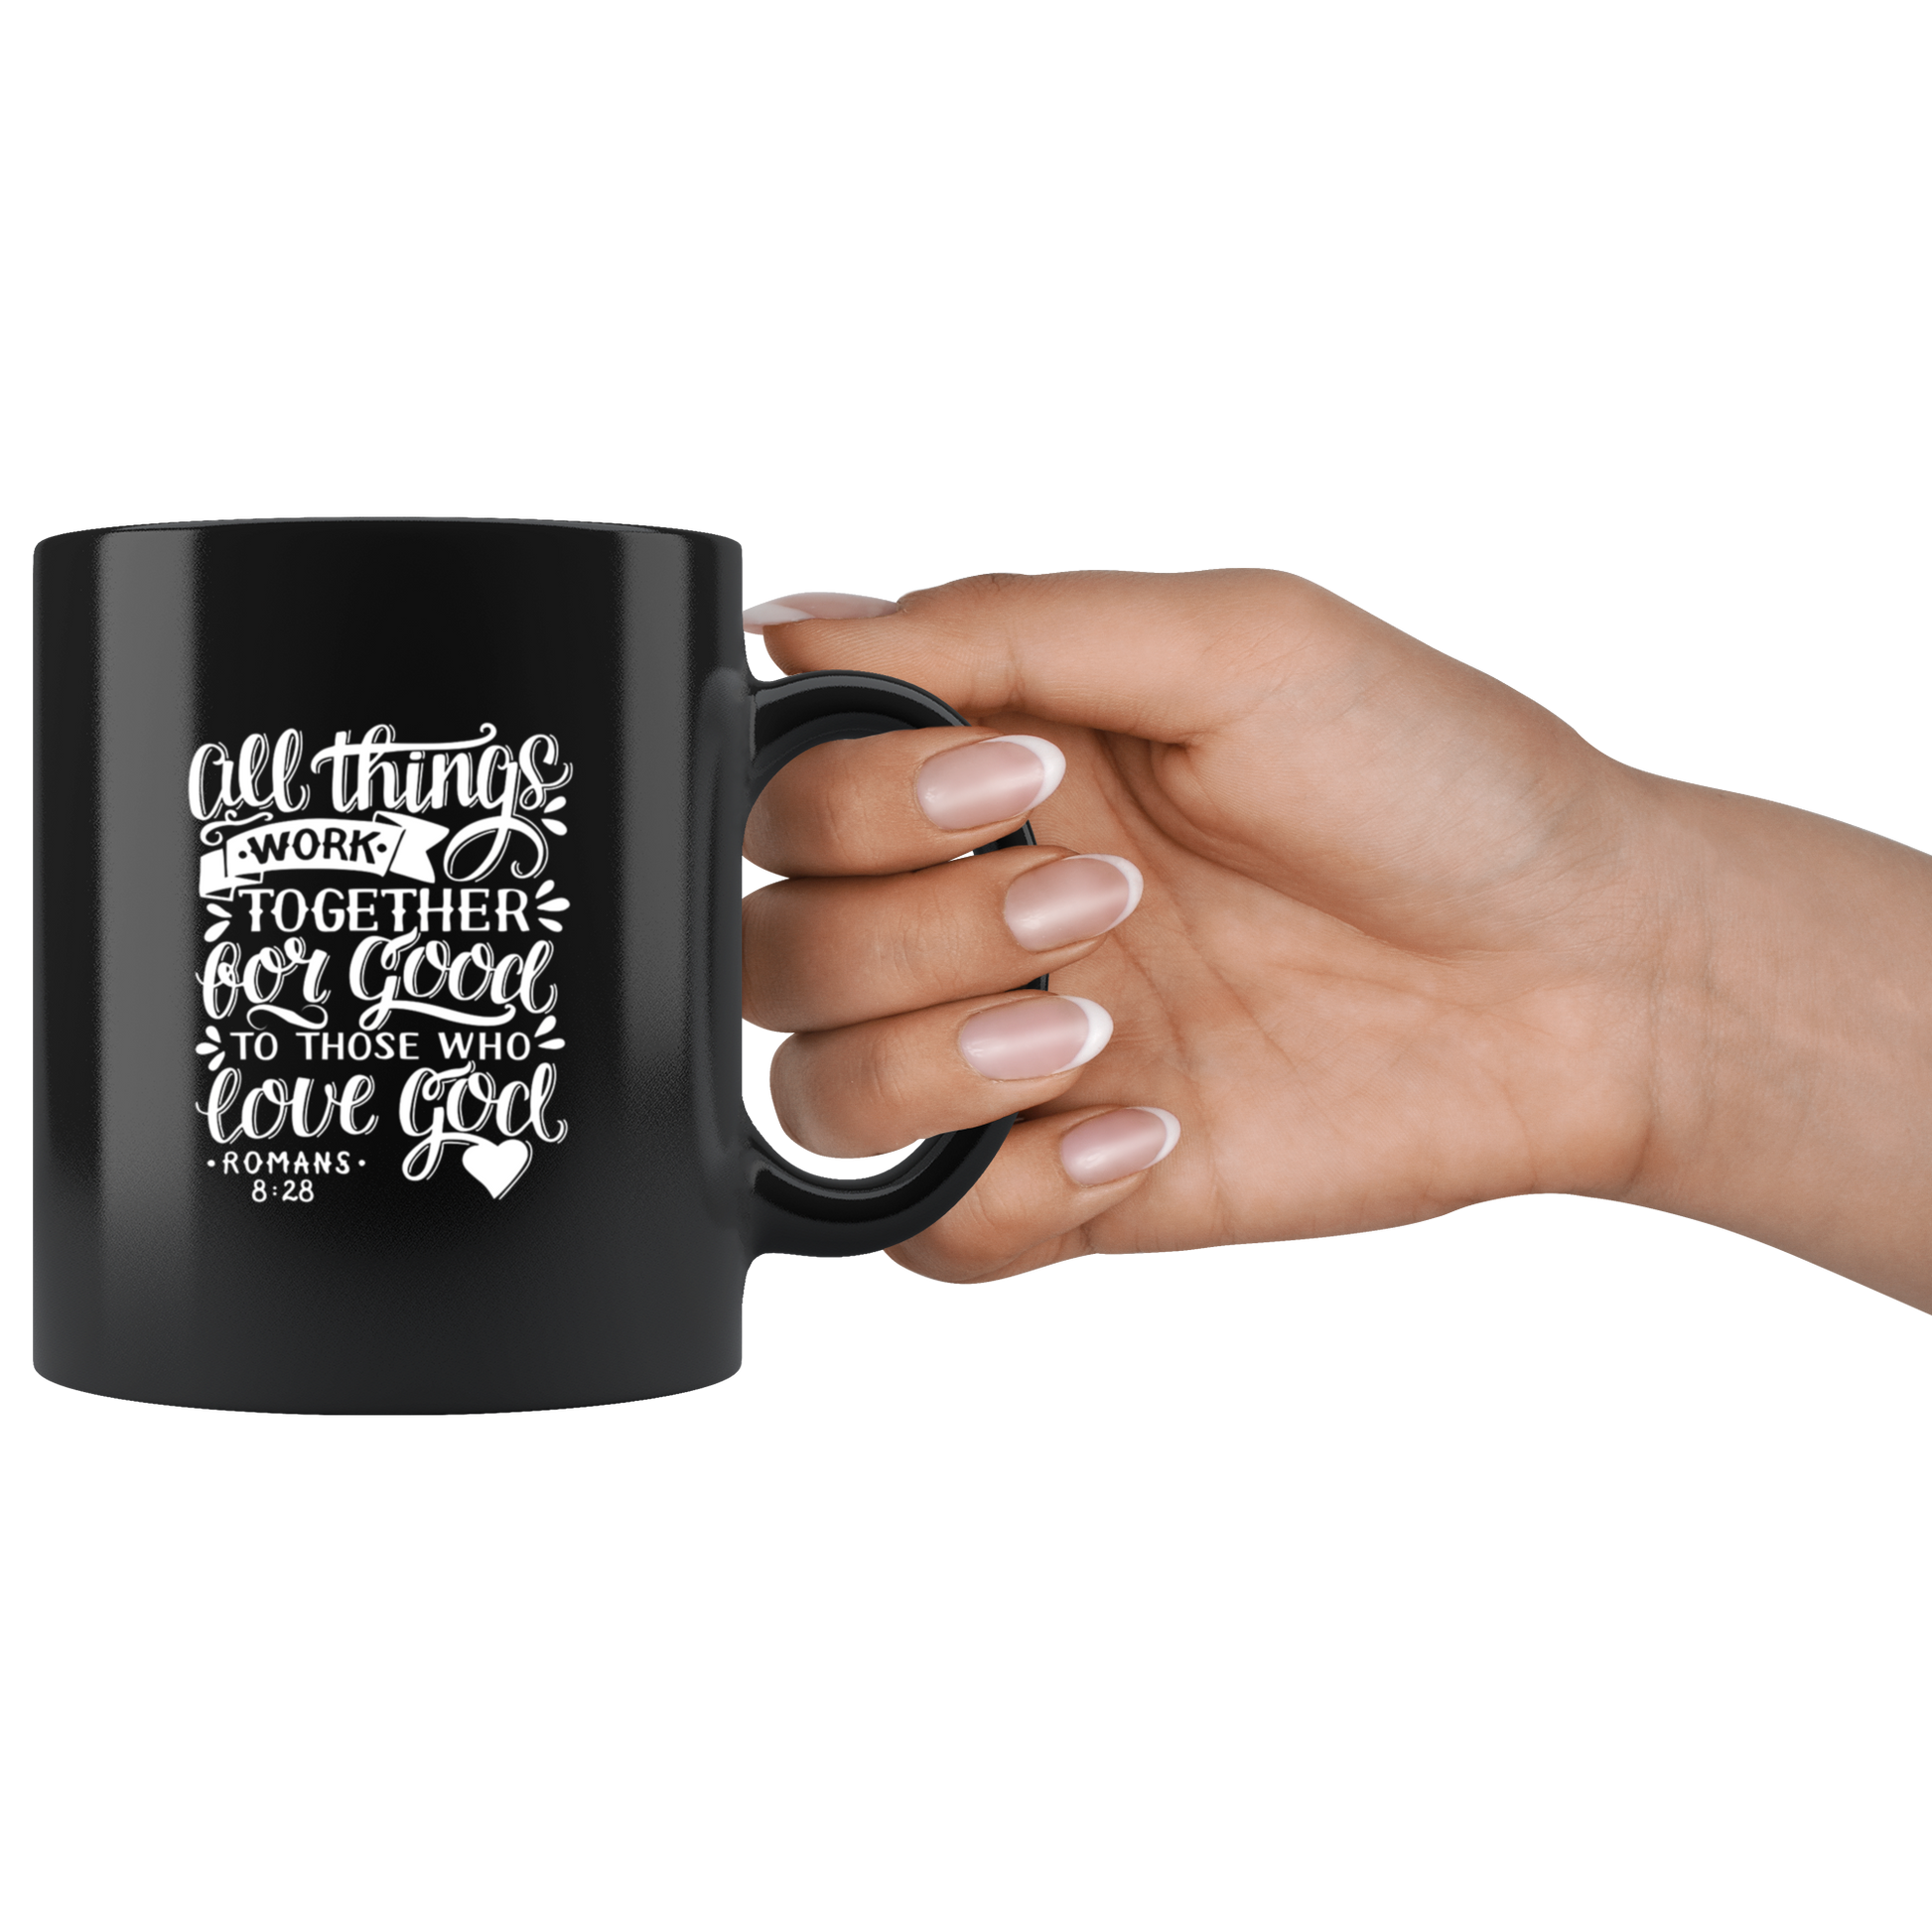 All Things Work Together For Good To Those Who Love God, Romans 8:28 - Black 11oz Mug in female hand